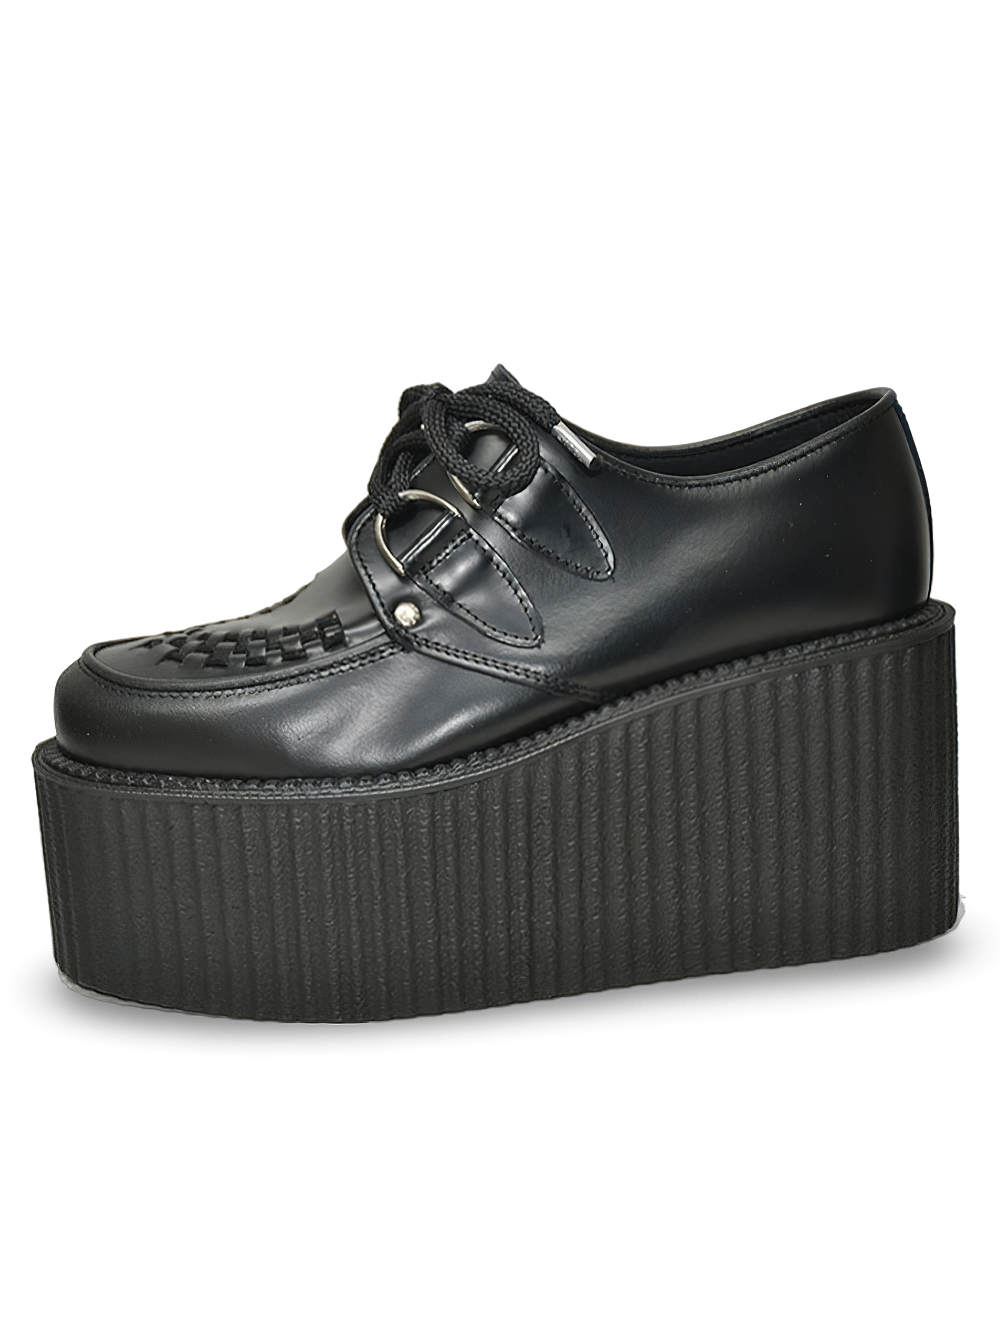 Triple Sole Round Toe Black Box Leather Creepers